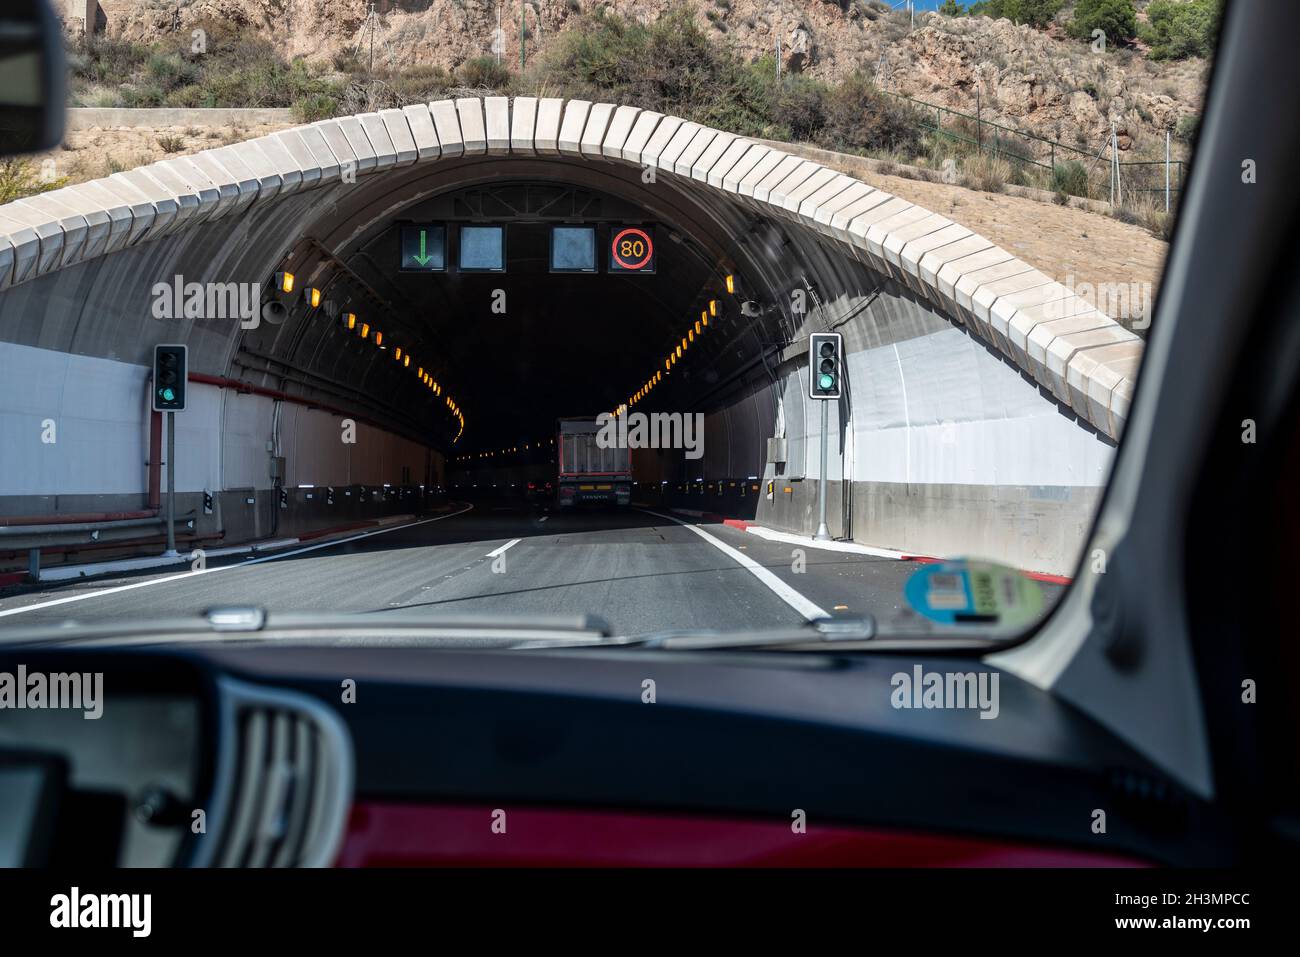 Driving into the Tunel de Lorca, A-7 road tunnel in Lorca, Region of Murcia, Spain. Inside car view of tunnel entrance with lorry, speed limit Stock Photo